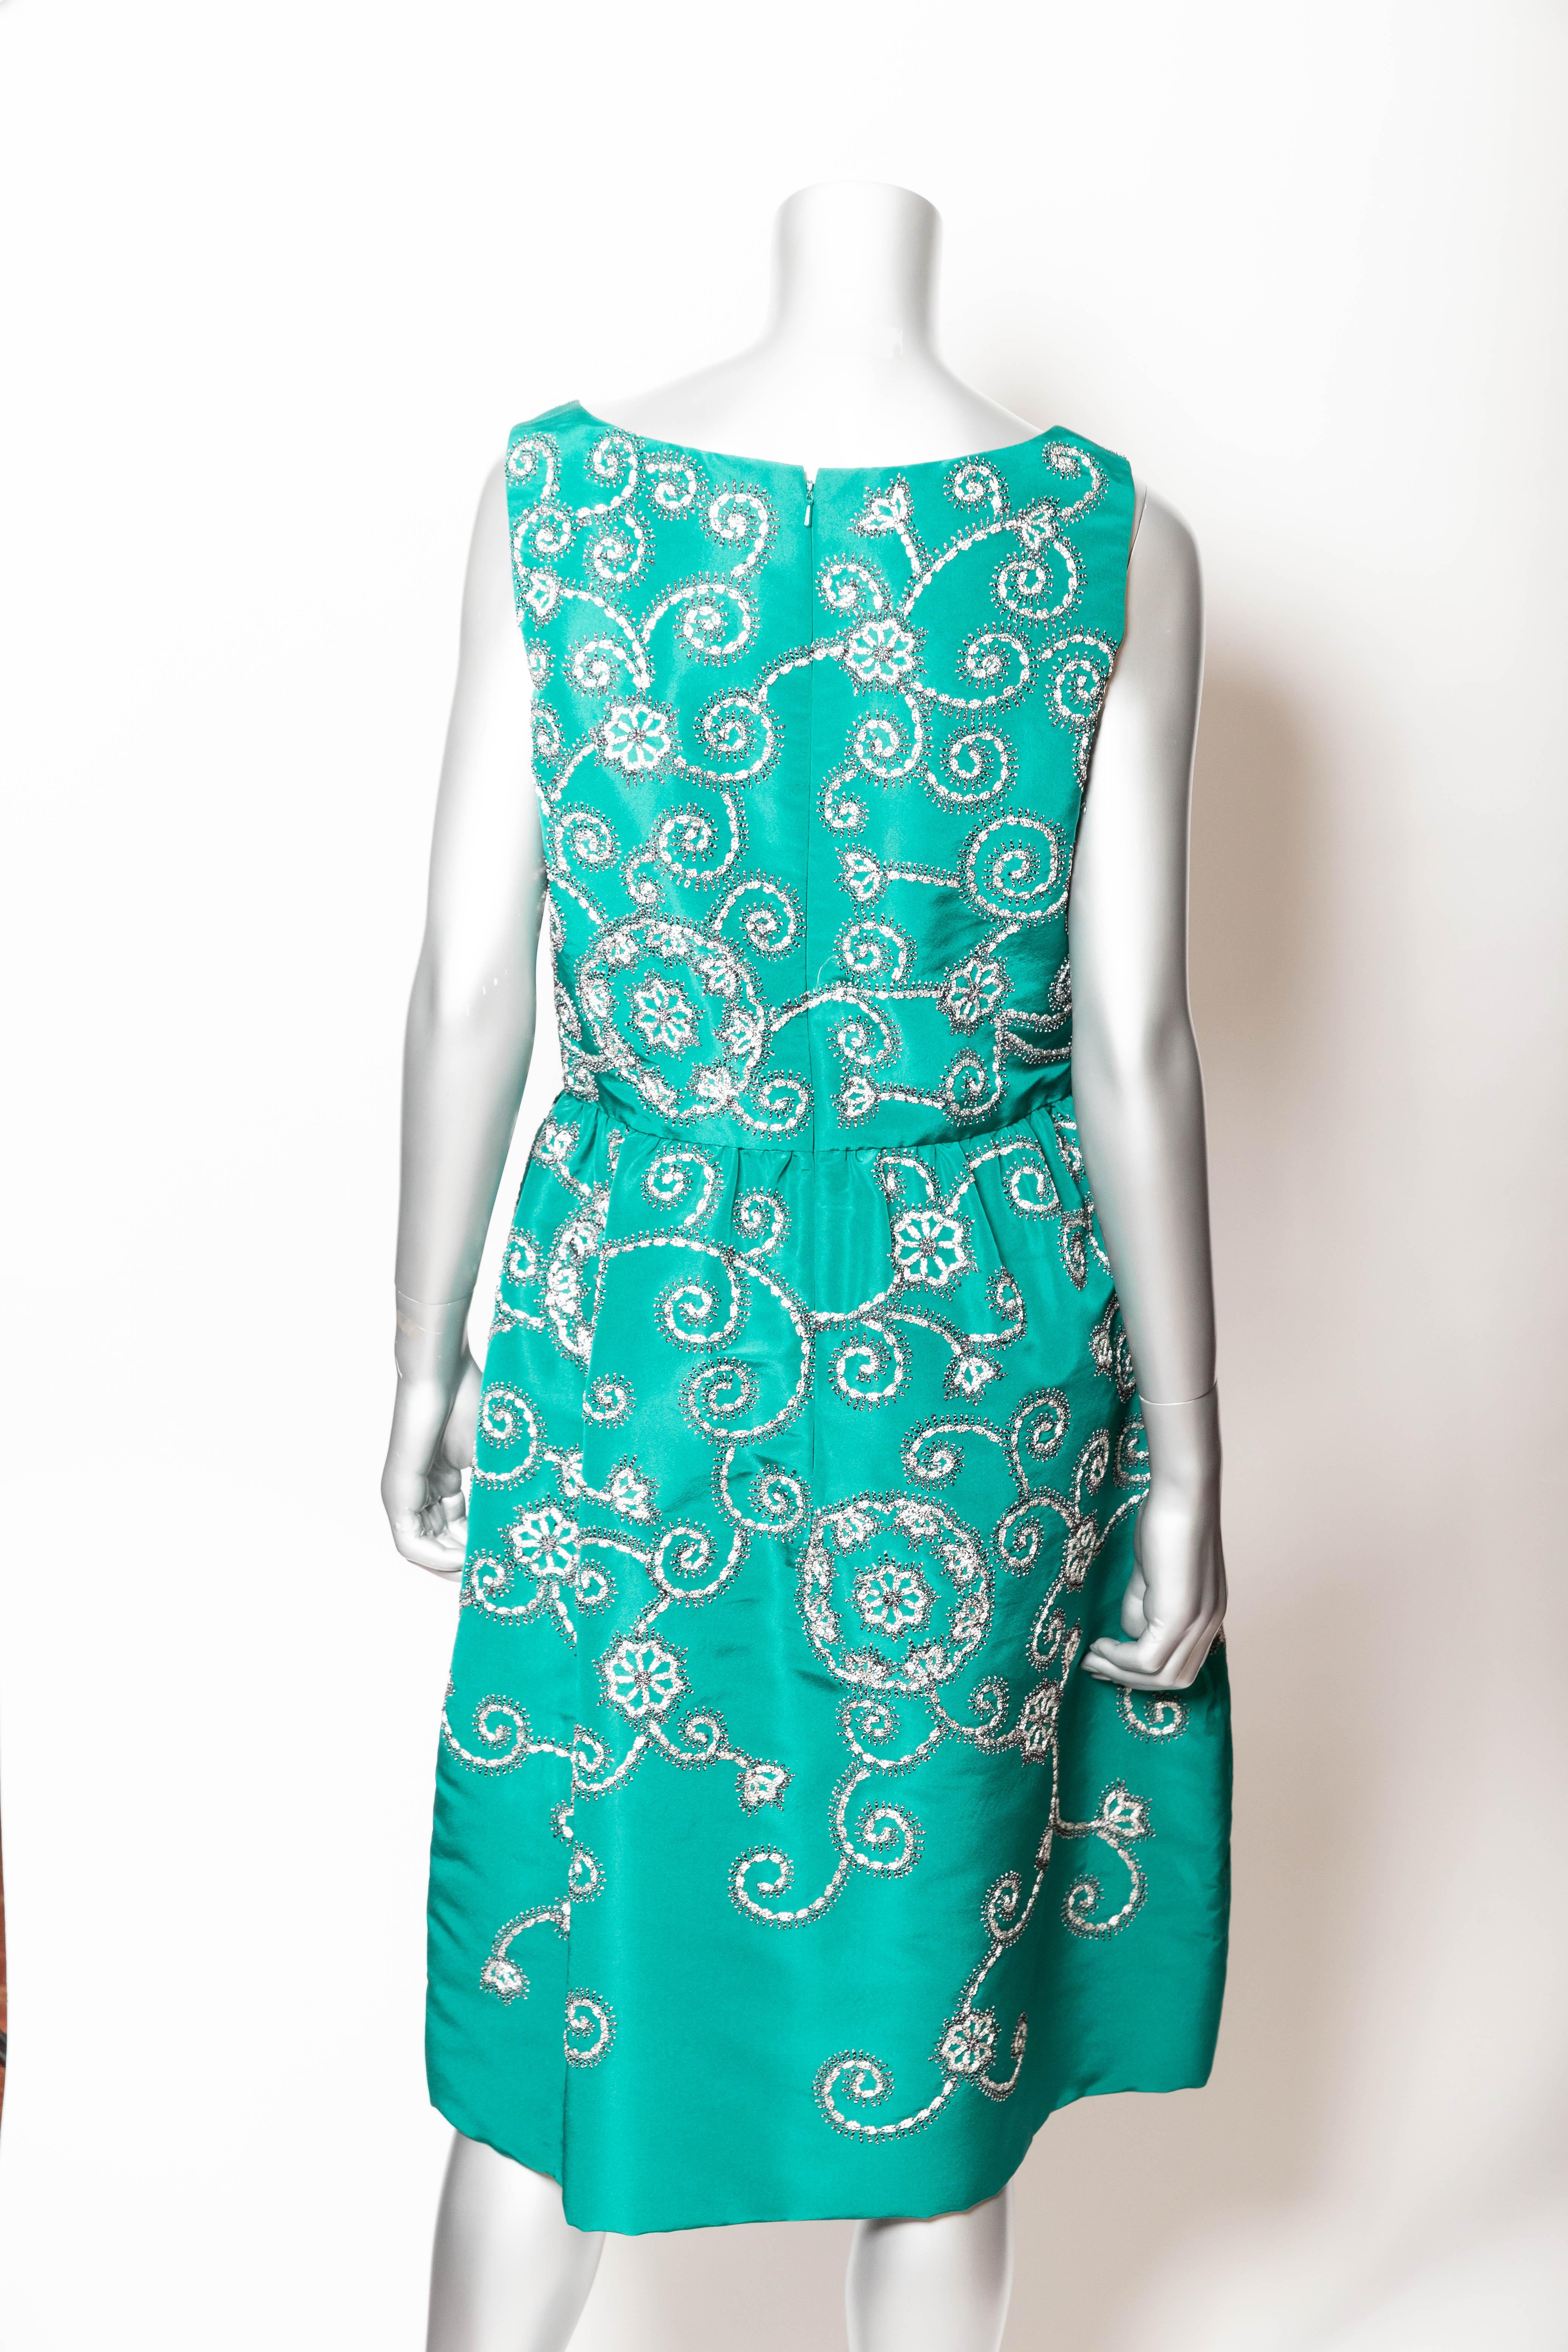 Stunning sleeveless Oscar de la Renta dress in jade green silk.
This dress is new with tags / original retail price of $5690.
Both embroidered and beaded, this dress has a back zip.
